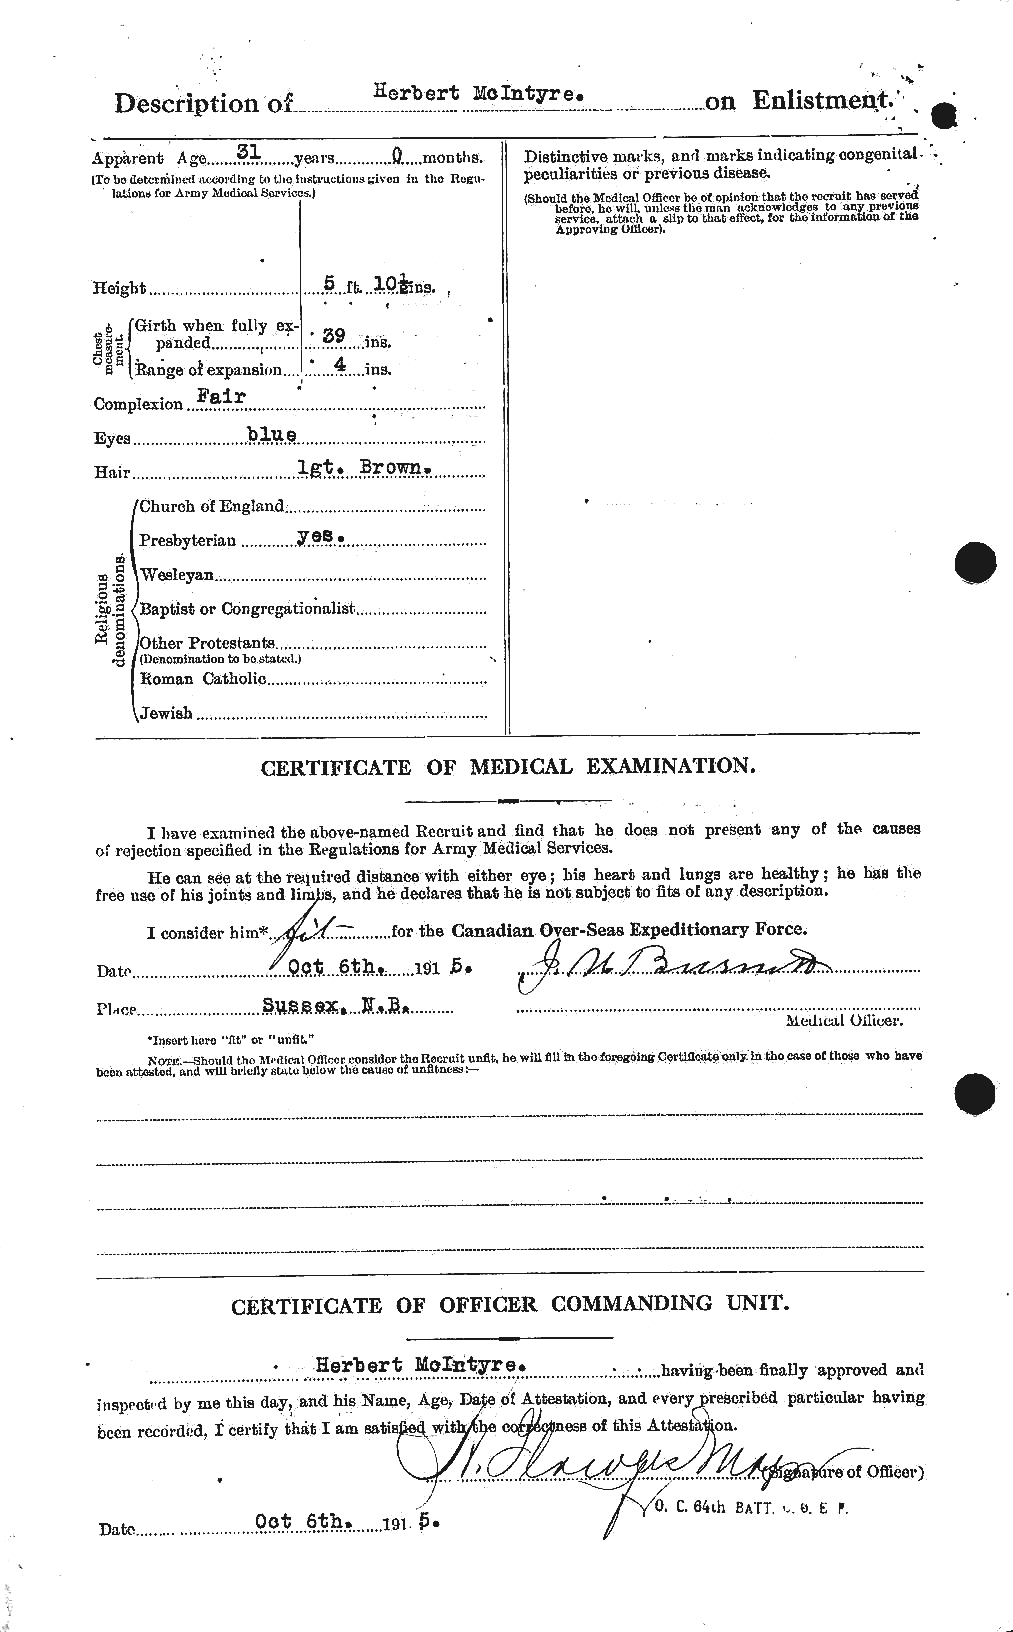 Personnel Records of the First World War - CEF 527427b